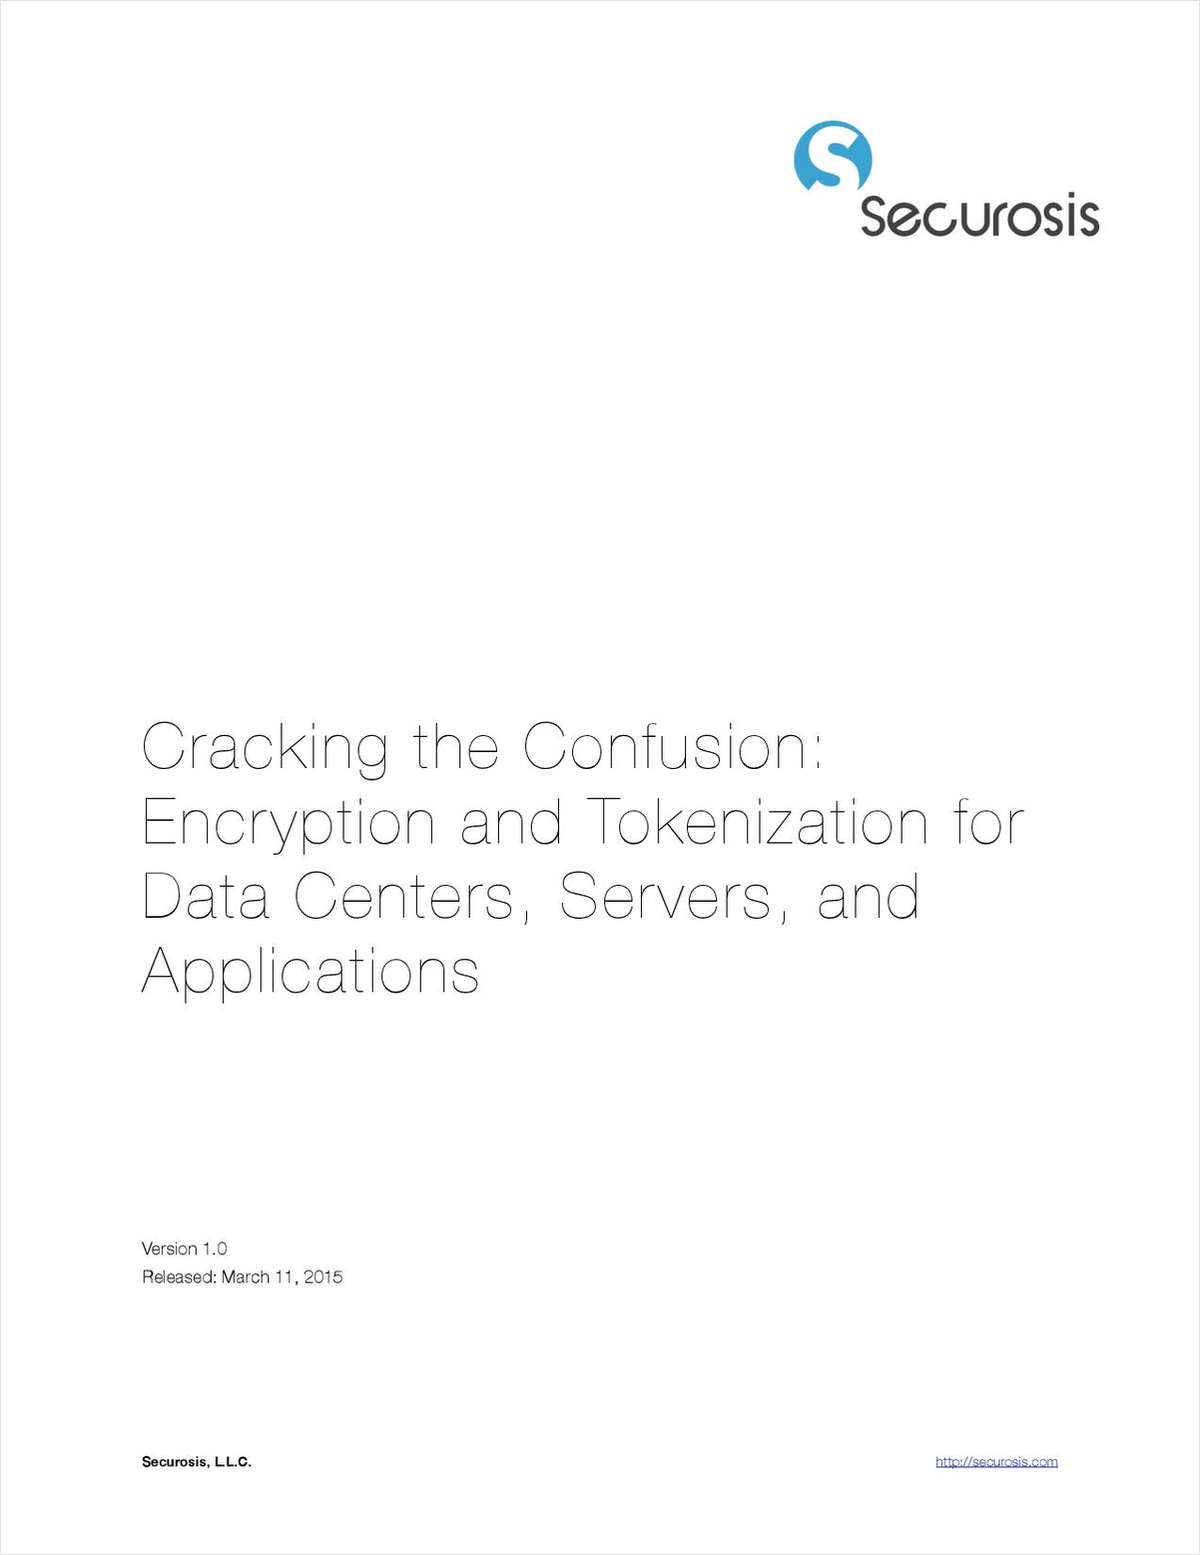 Securosis: Cracking the Confusion: Encryption and Tokenization for Data Centers, Servers, and Applications